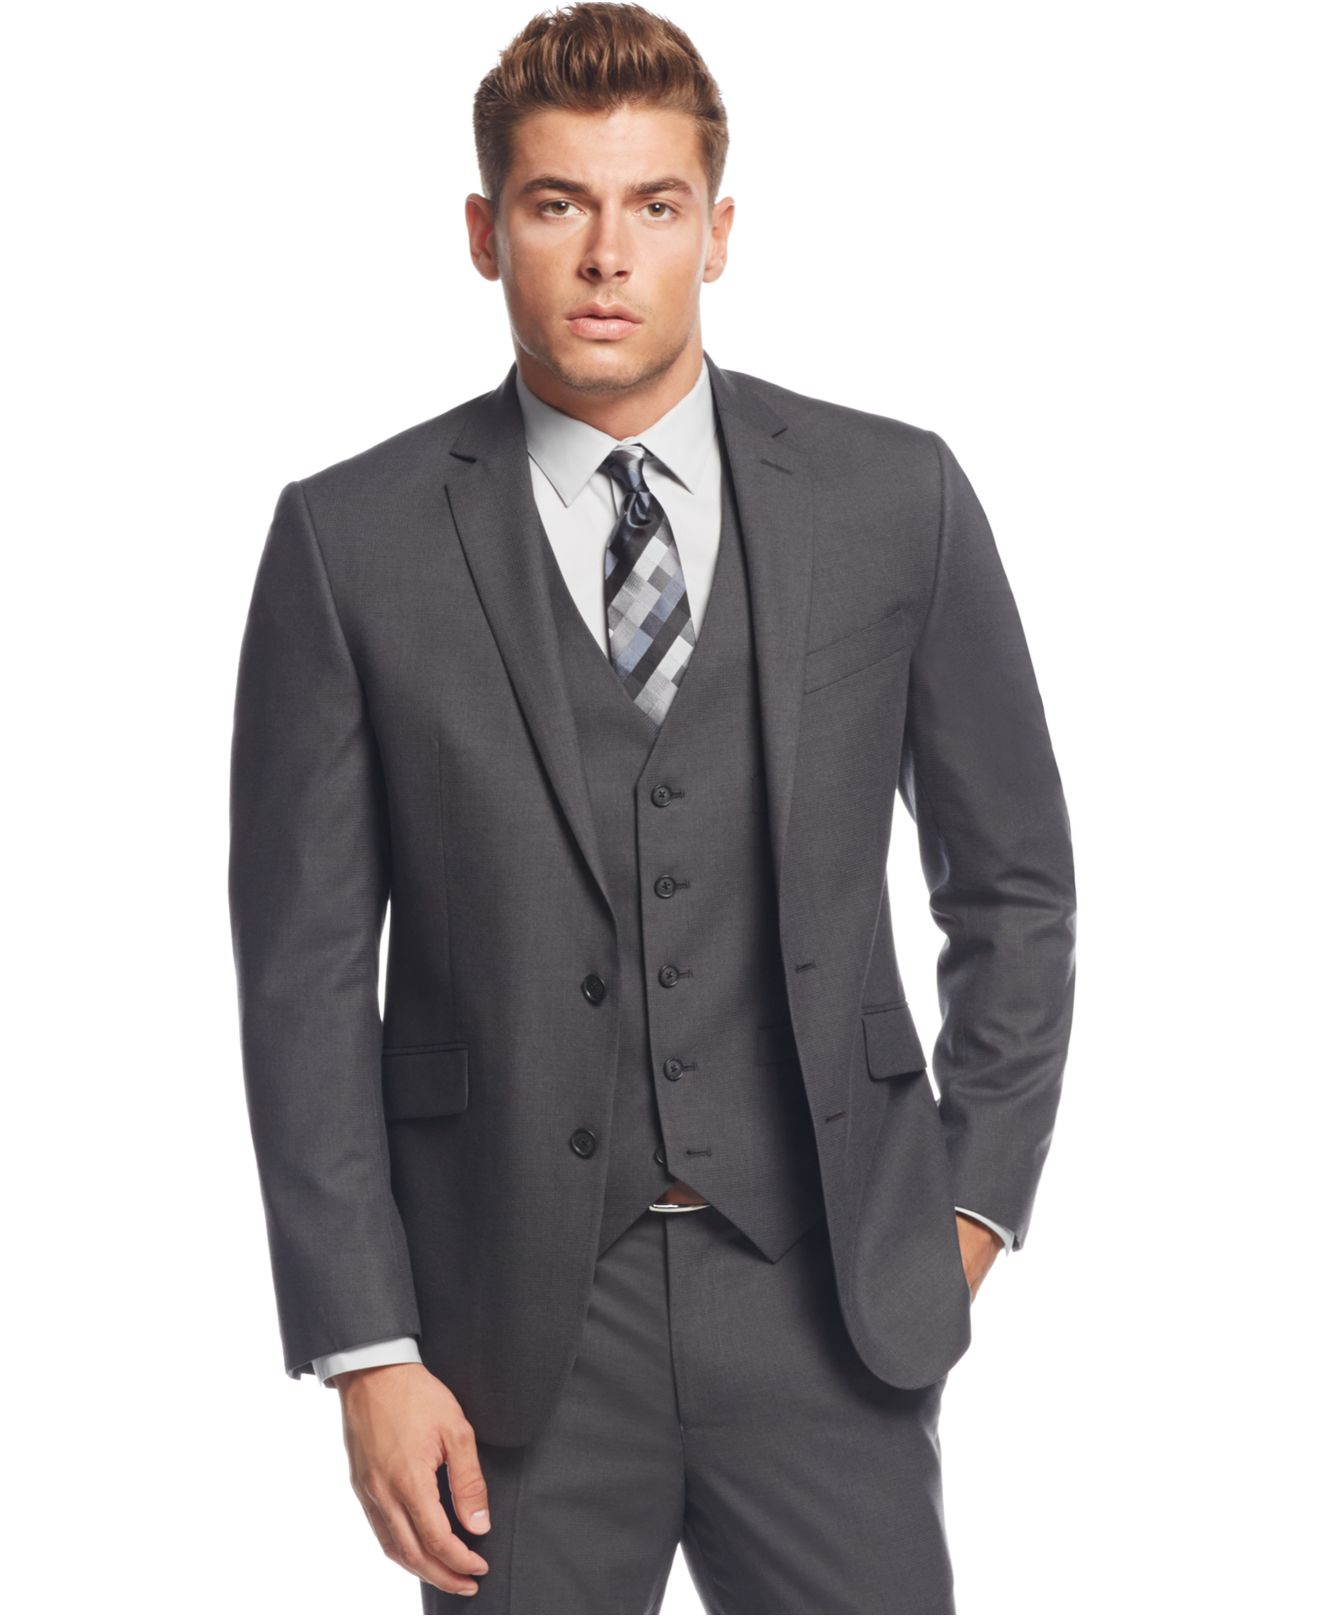 Lyst - Kenneth Cole Reaction Grey Tonal Shadow Check Slim-fit Vested ...